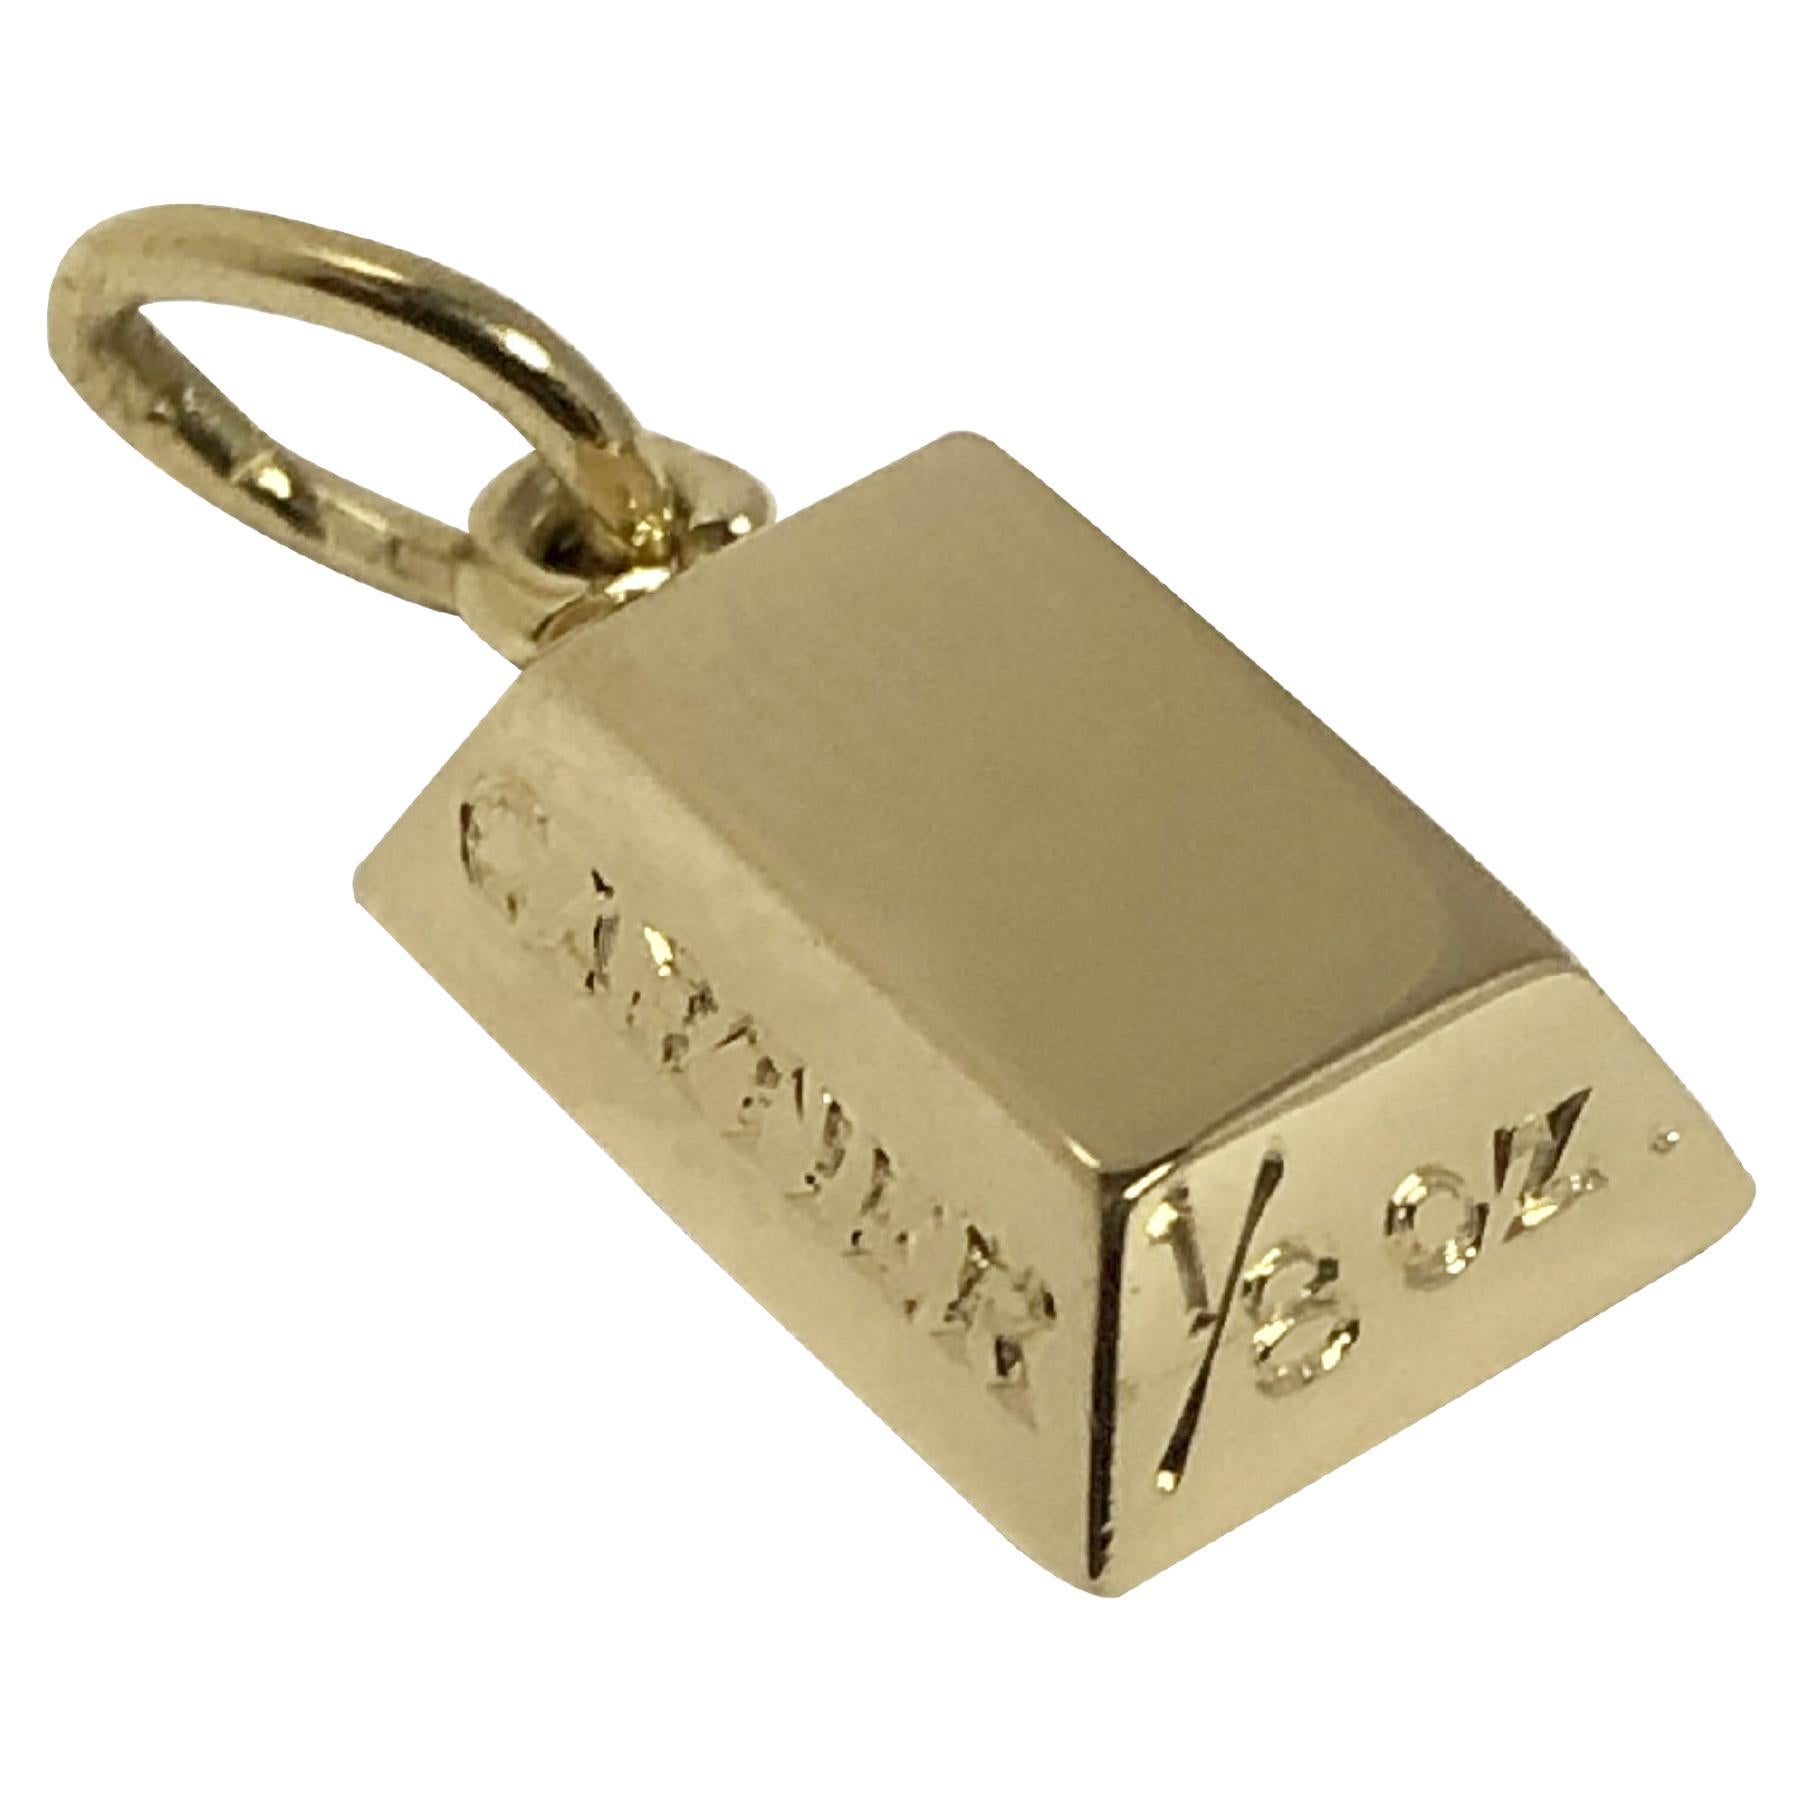 Circa 1980s Cartier 1/8 Oz Gold Ingot Charm, 18k Yellow Gold and measuring 1/2 x 5/16 inch. comes in original presentation box. Excellent and unworn. 